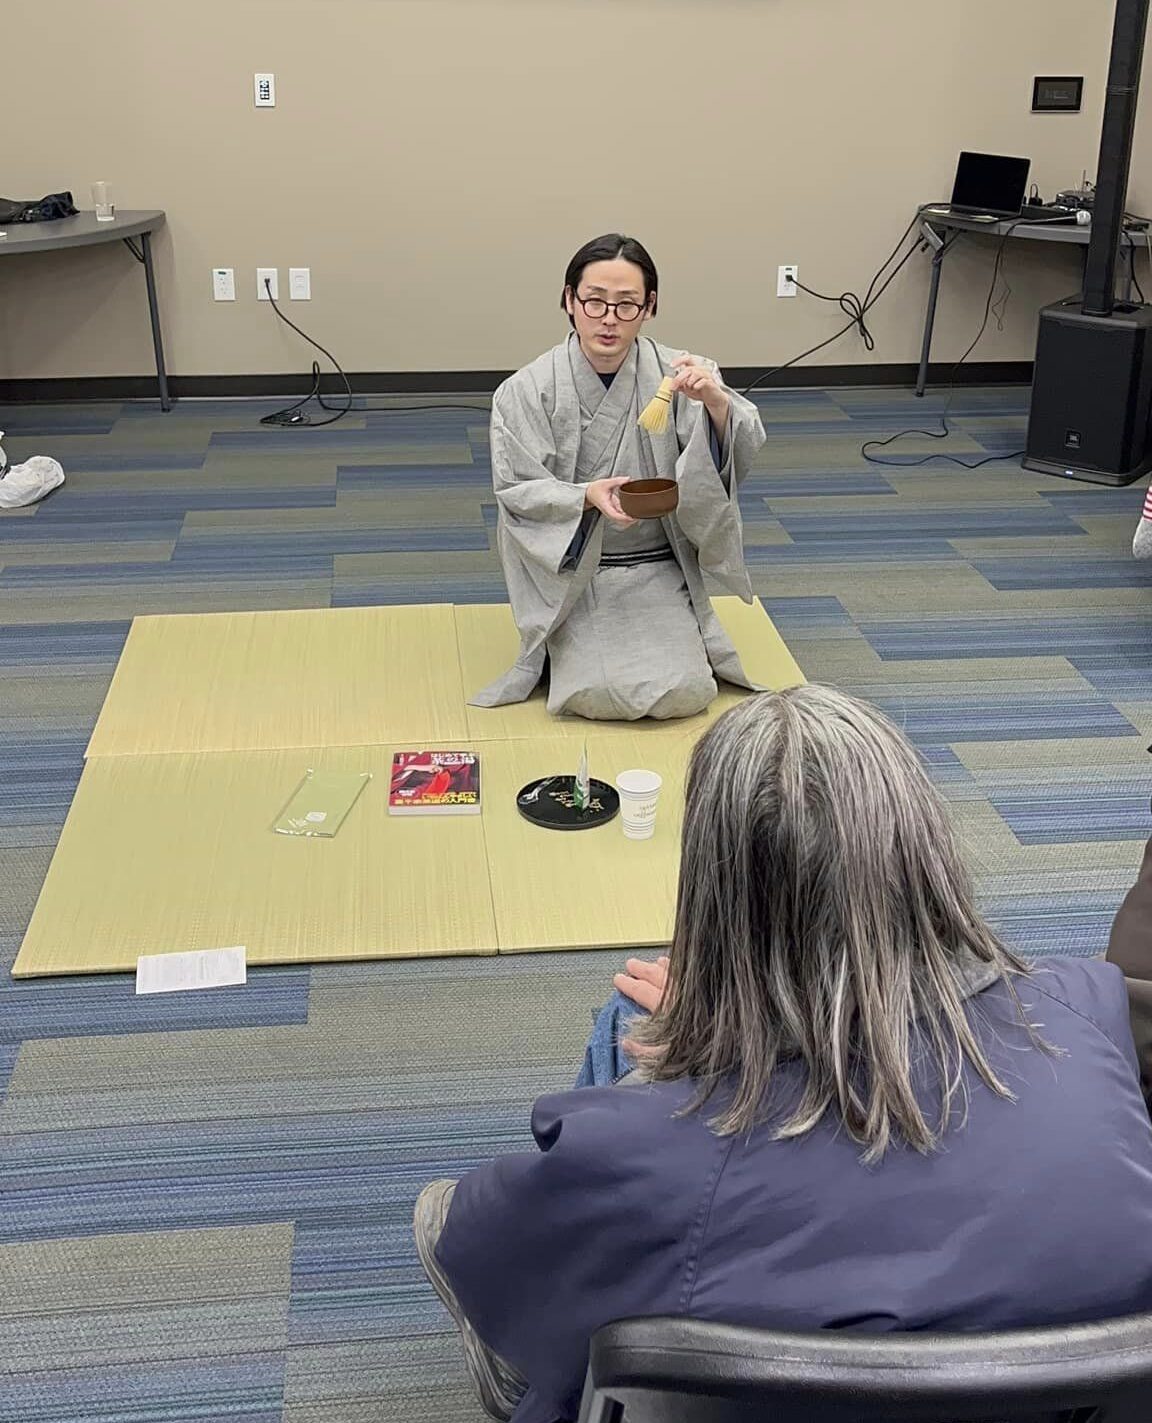 A person of light skin tone wearing a traditional Japanese robe demonstrates the making of tea while sitting on a mat. They are holding a bowl-like vessel in one hand and a small bamboo whisk in the other.